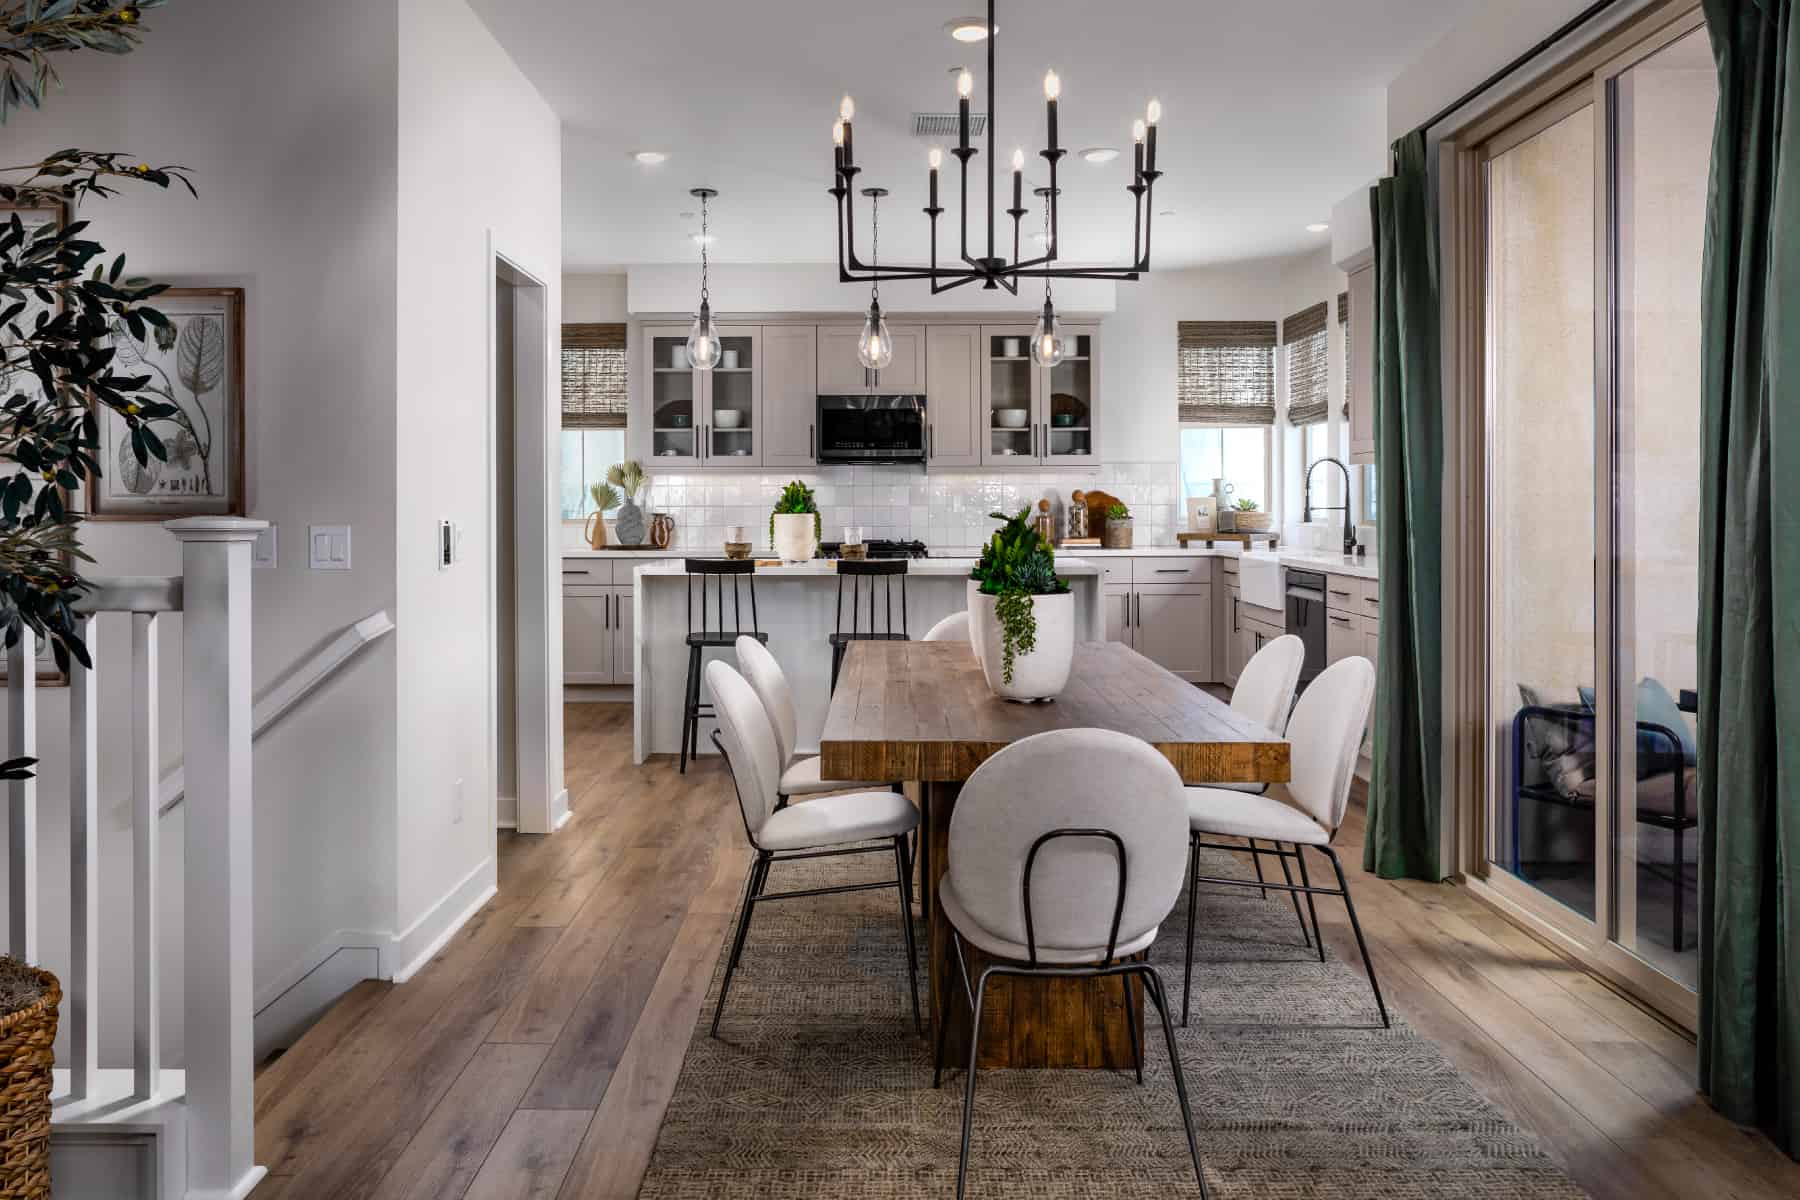 Dining/Kitchen at Plan 7 of Belmont by Melia Homes in Cypress, CA